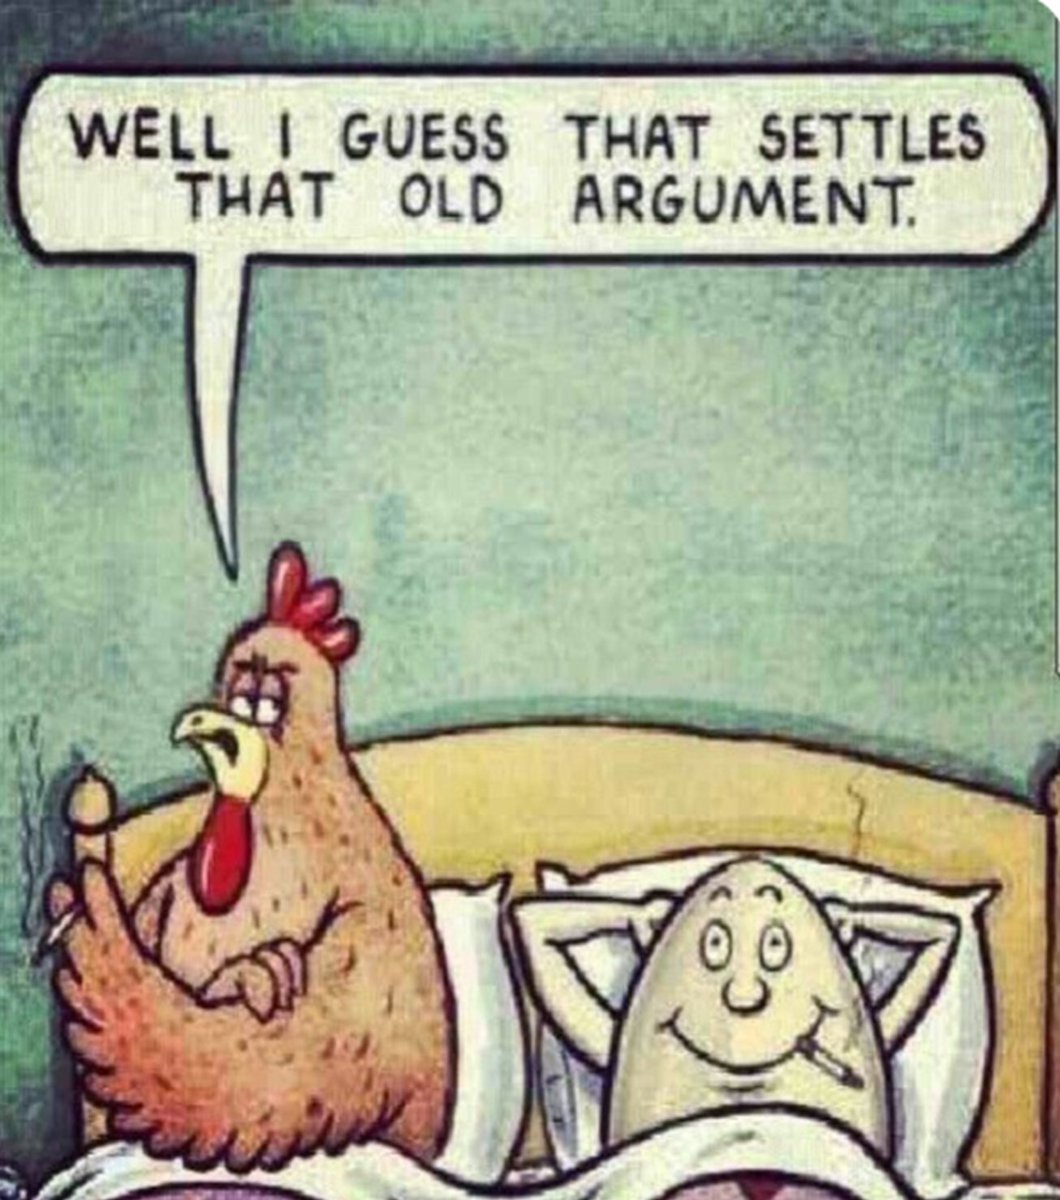 #FridayFunny Well, I guess that settles that old argument.